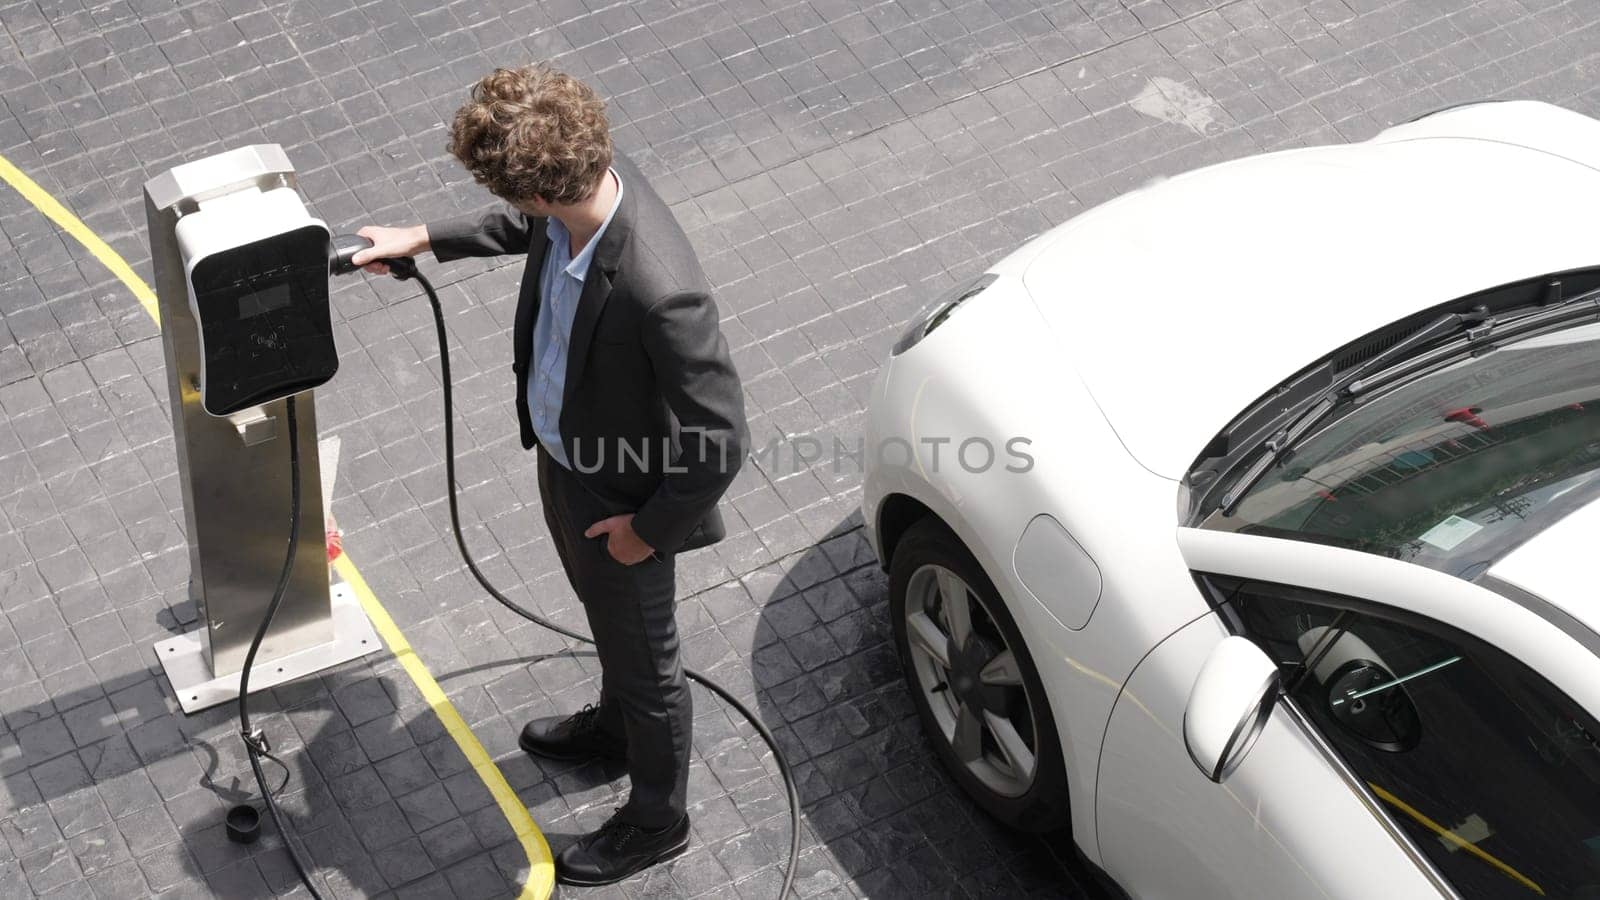 Progressive businessman install charger plug from charging station to his electric car before driving around city center. Eco friendly rechargeable car powered by sustainable and clean energy.